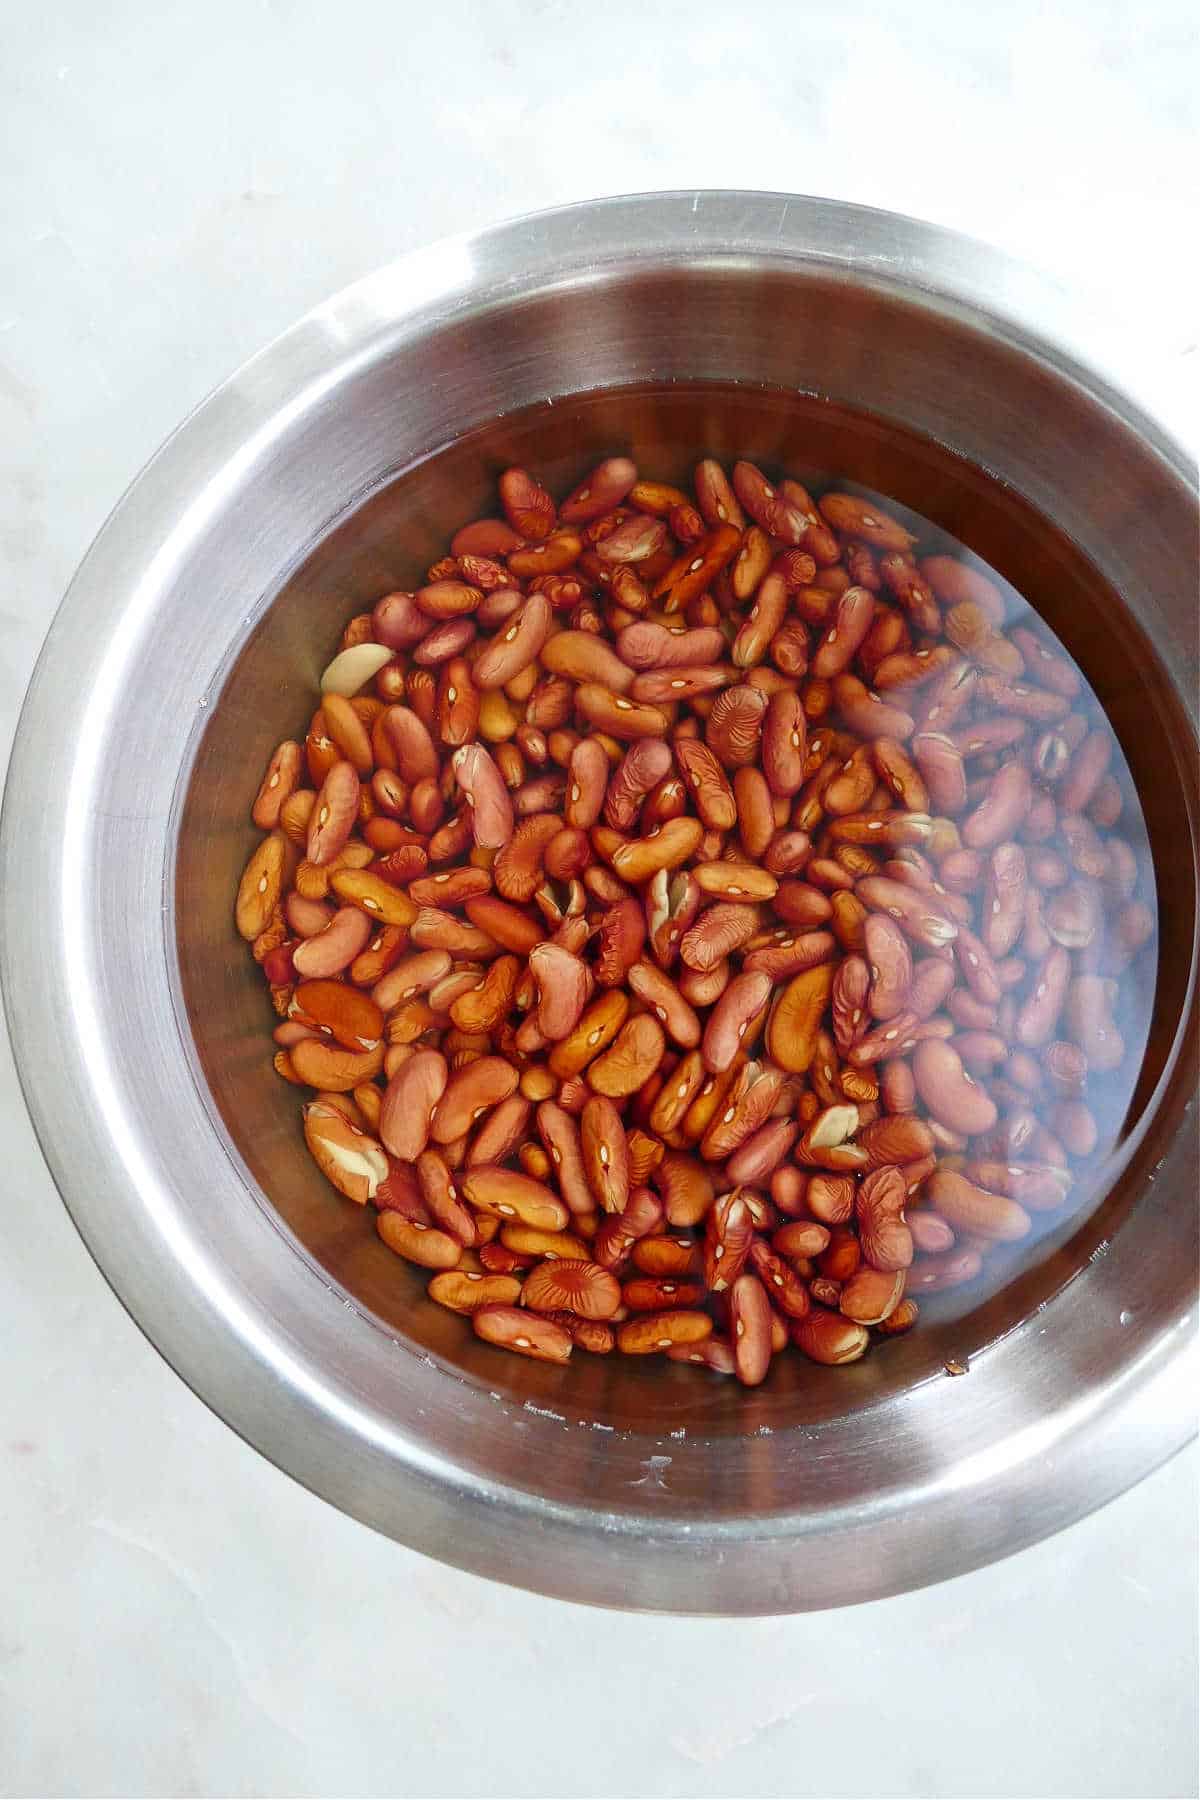 red kidney beans soaking in a bowl full of water on a counter